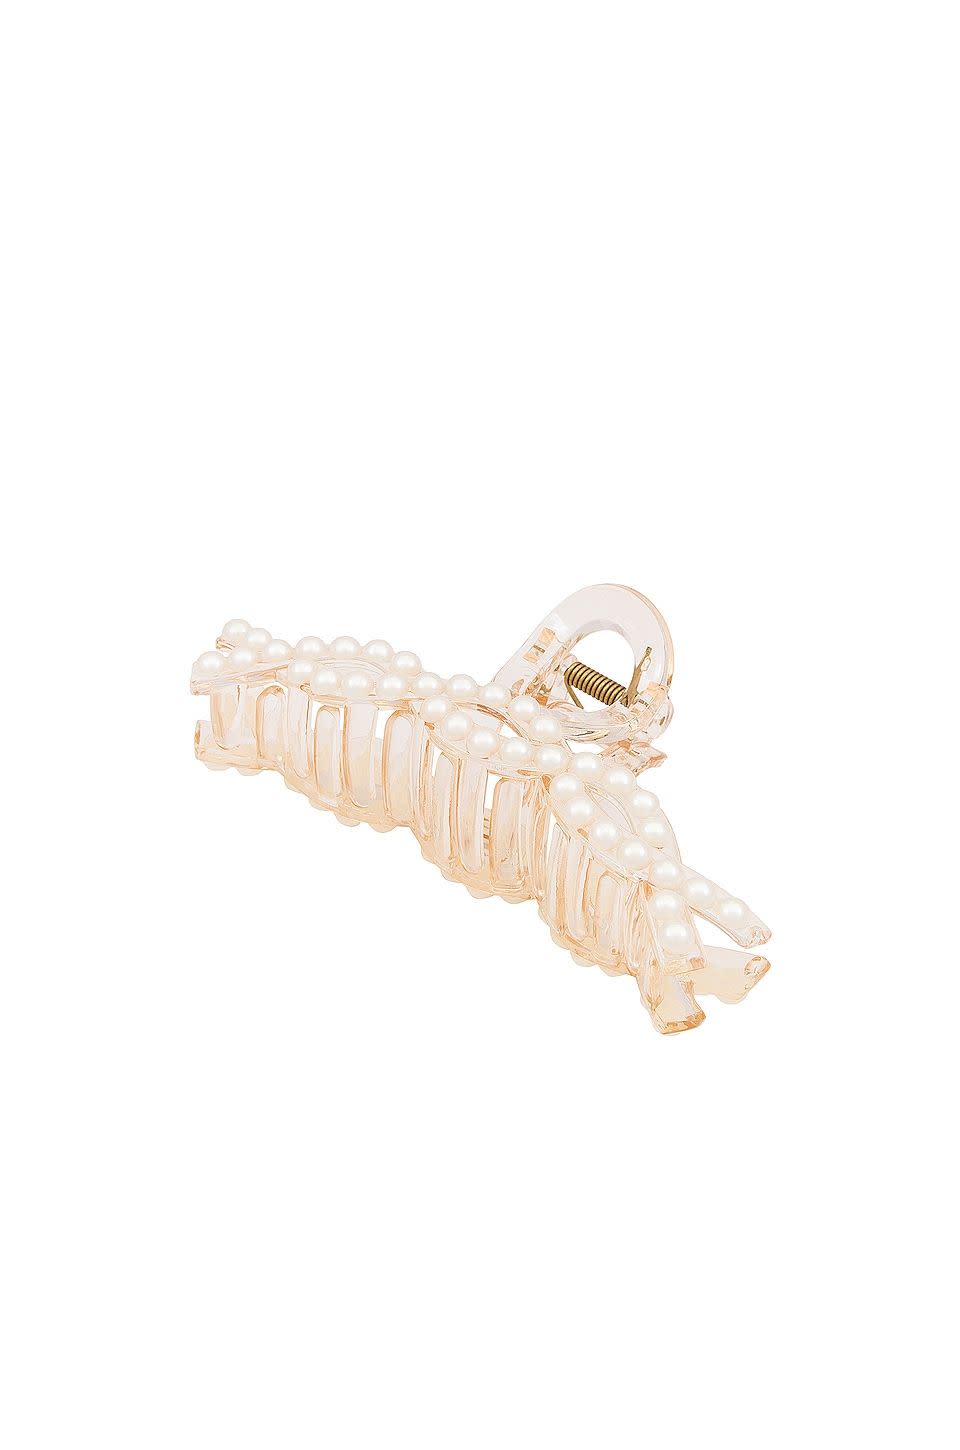 <p><strong>8 Other Reasons</strong></p><p>revolve.com</p><p><strong>$28.00</strong></p><p>If you don't want to have pearl-adorned hair accessories in your life, I'm just not sure what we have in common. This design is perfect for making a stranger fall in love with you at a holiday party.</p>